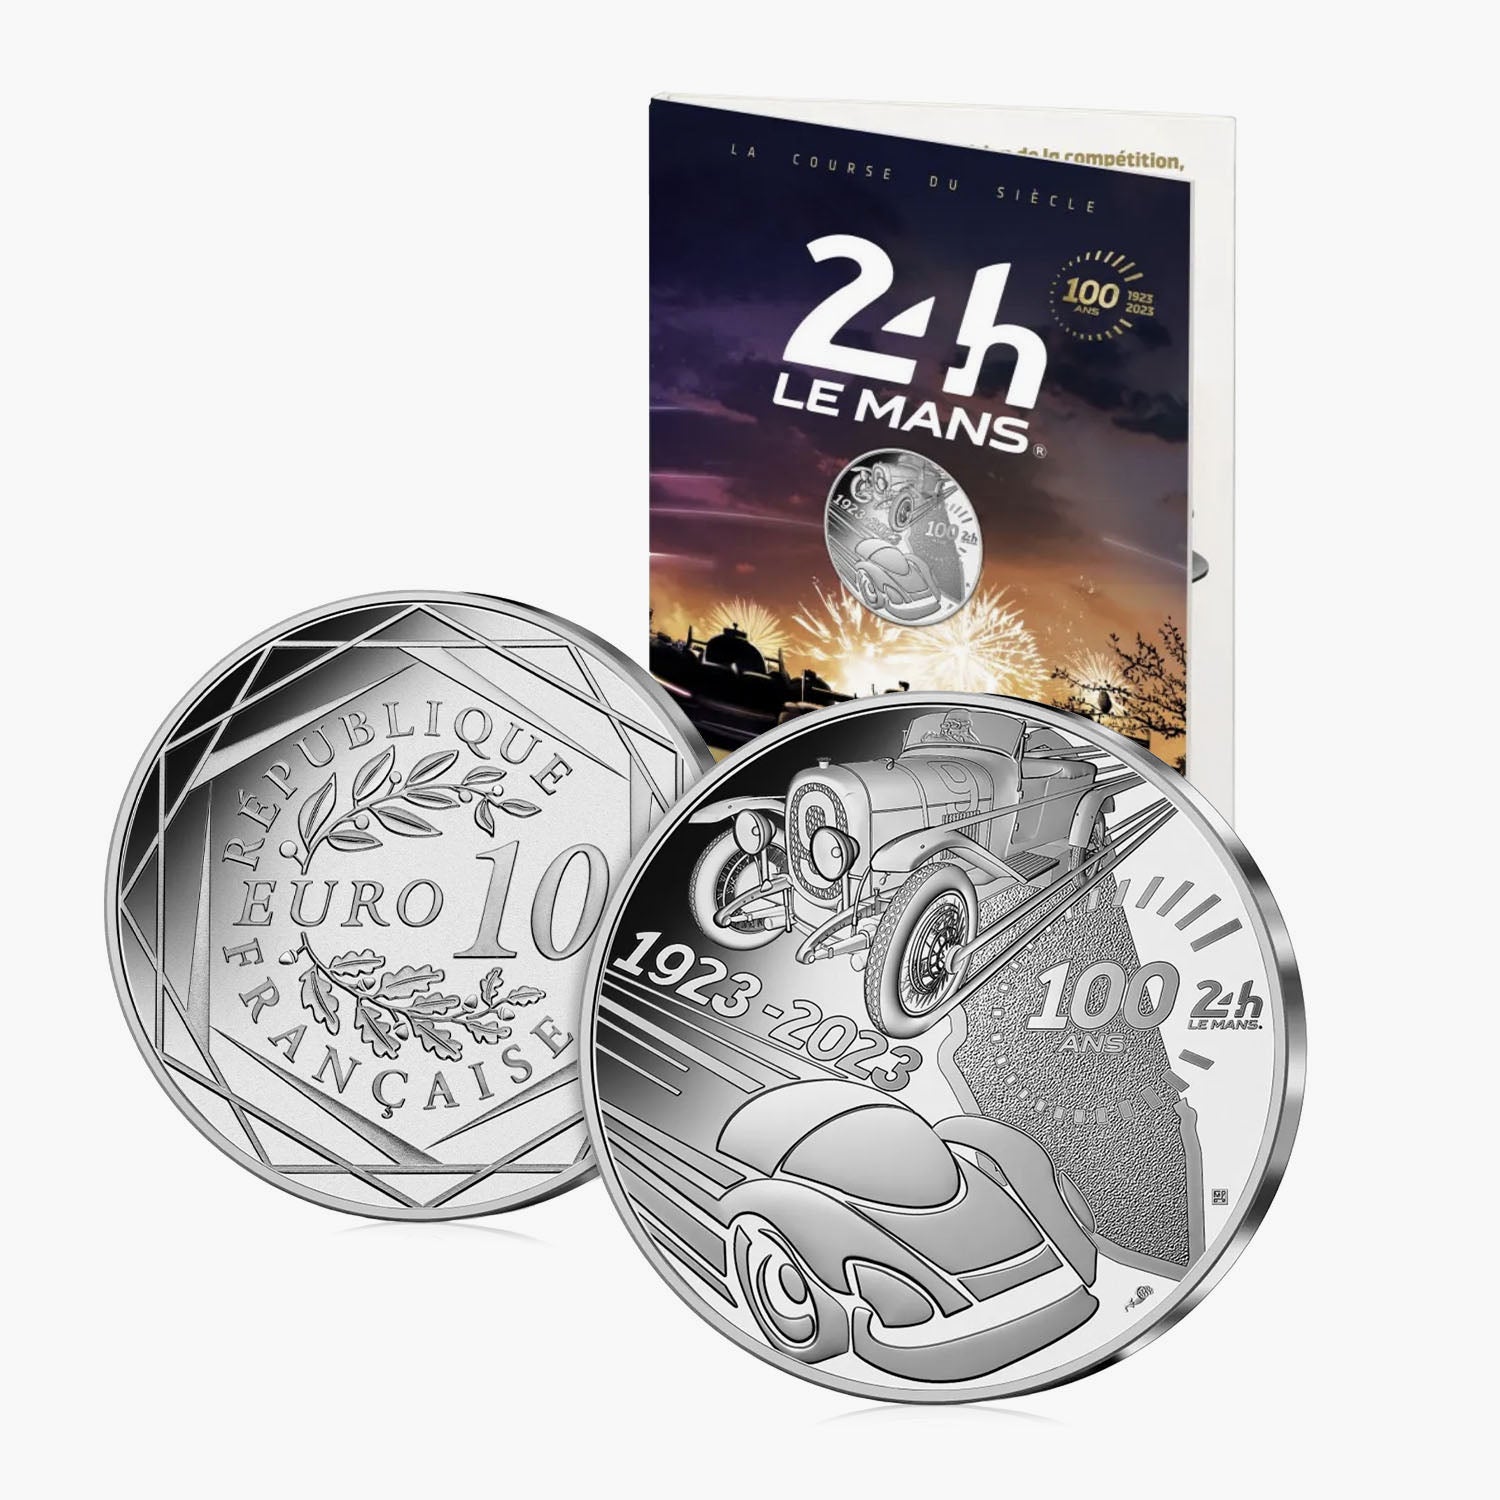 100 Year Anniversary of the 24 Hours Le Mans 10 Silver Coin